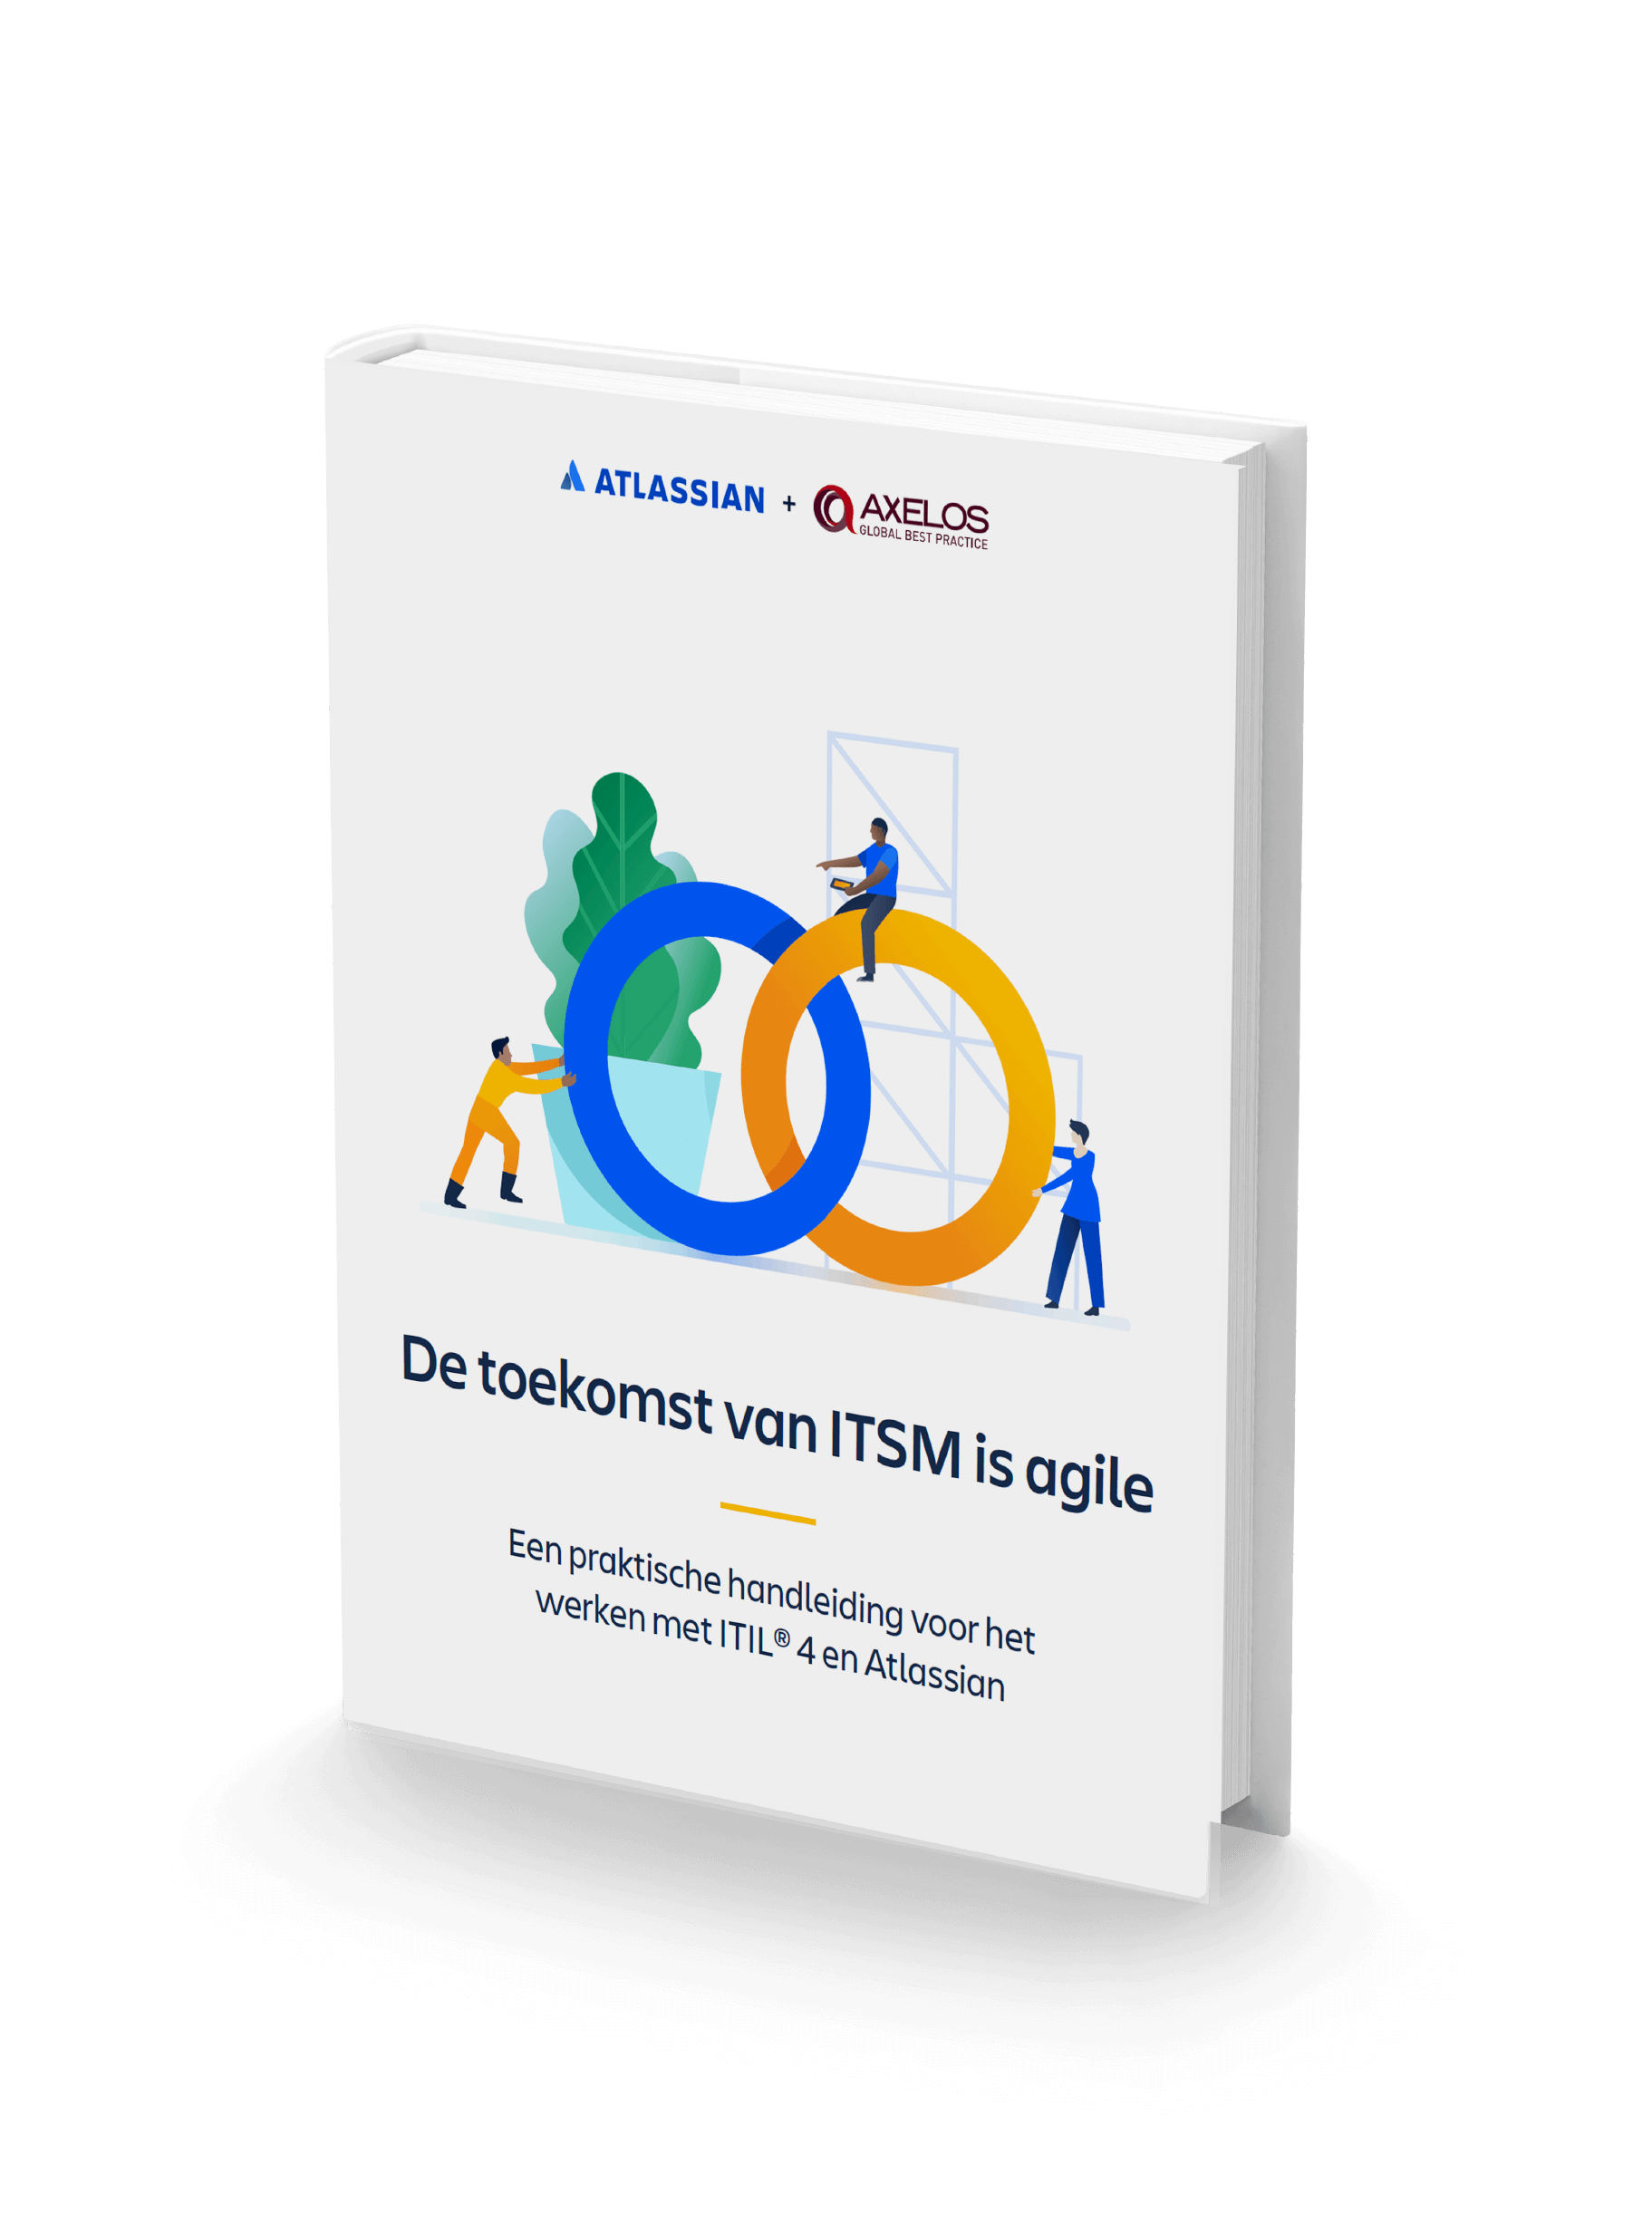 The future of ITSM is agile guide book